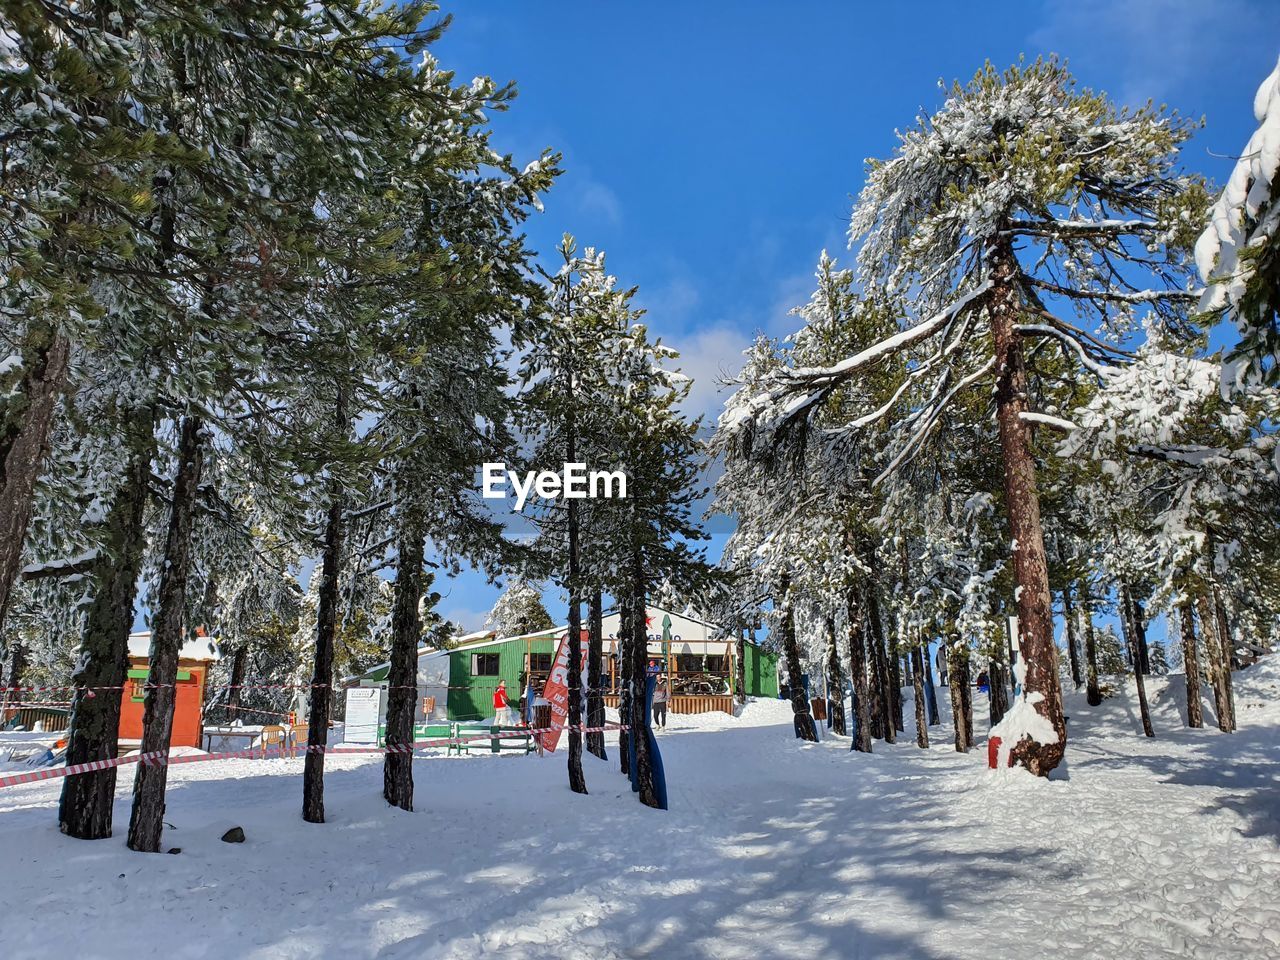 The mount olympos on troodos mountains in cyprus